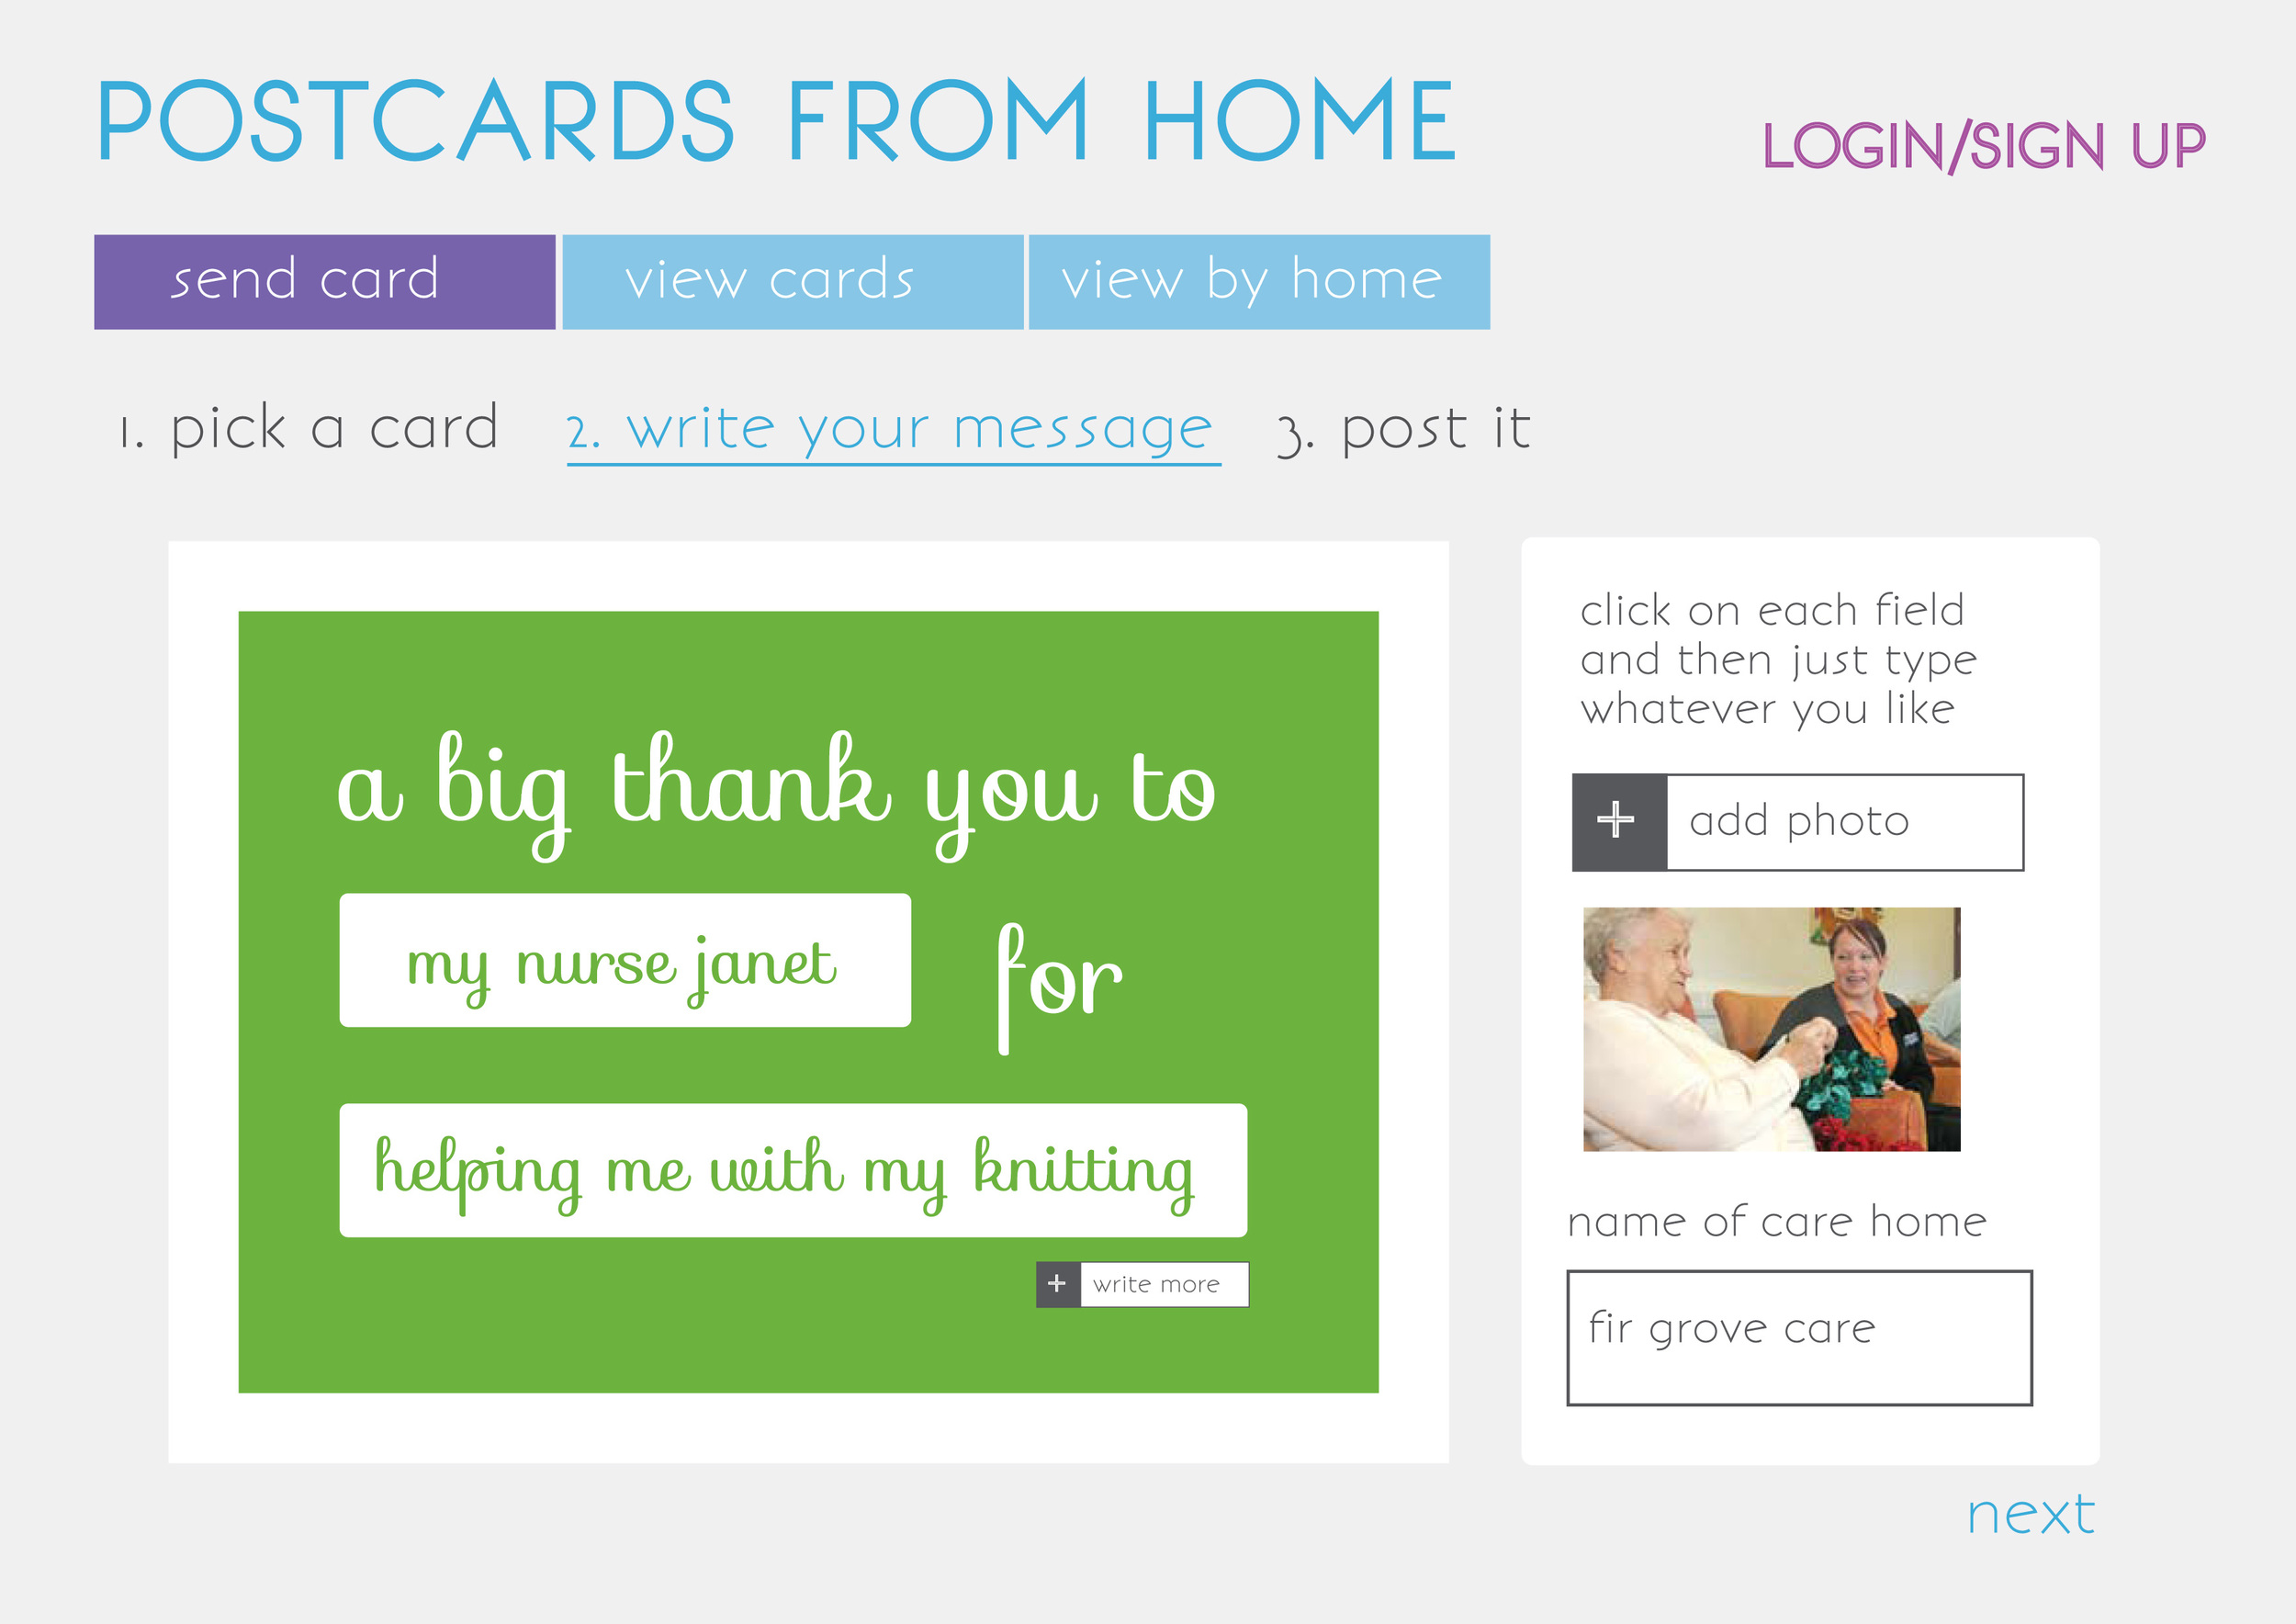 postcards from home interface_all-2.jpg